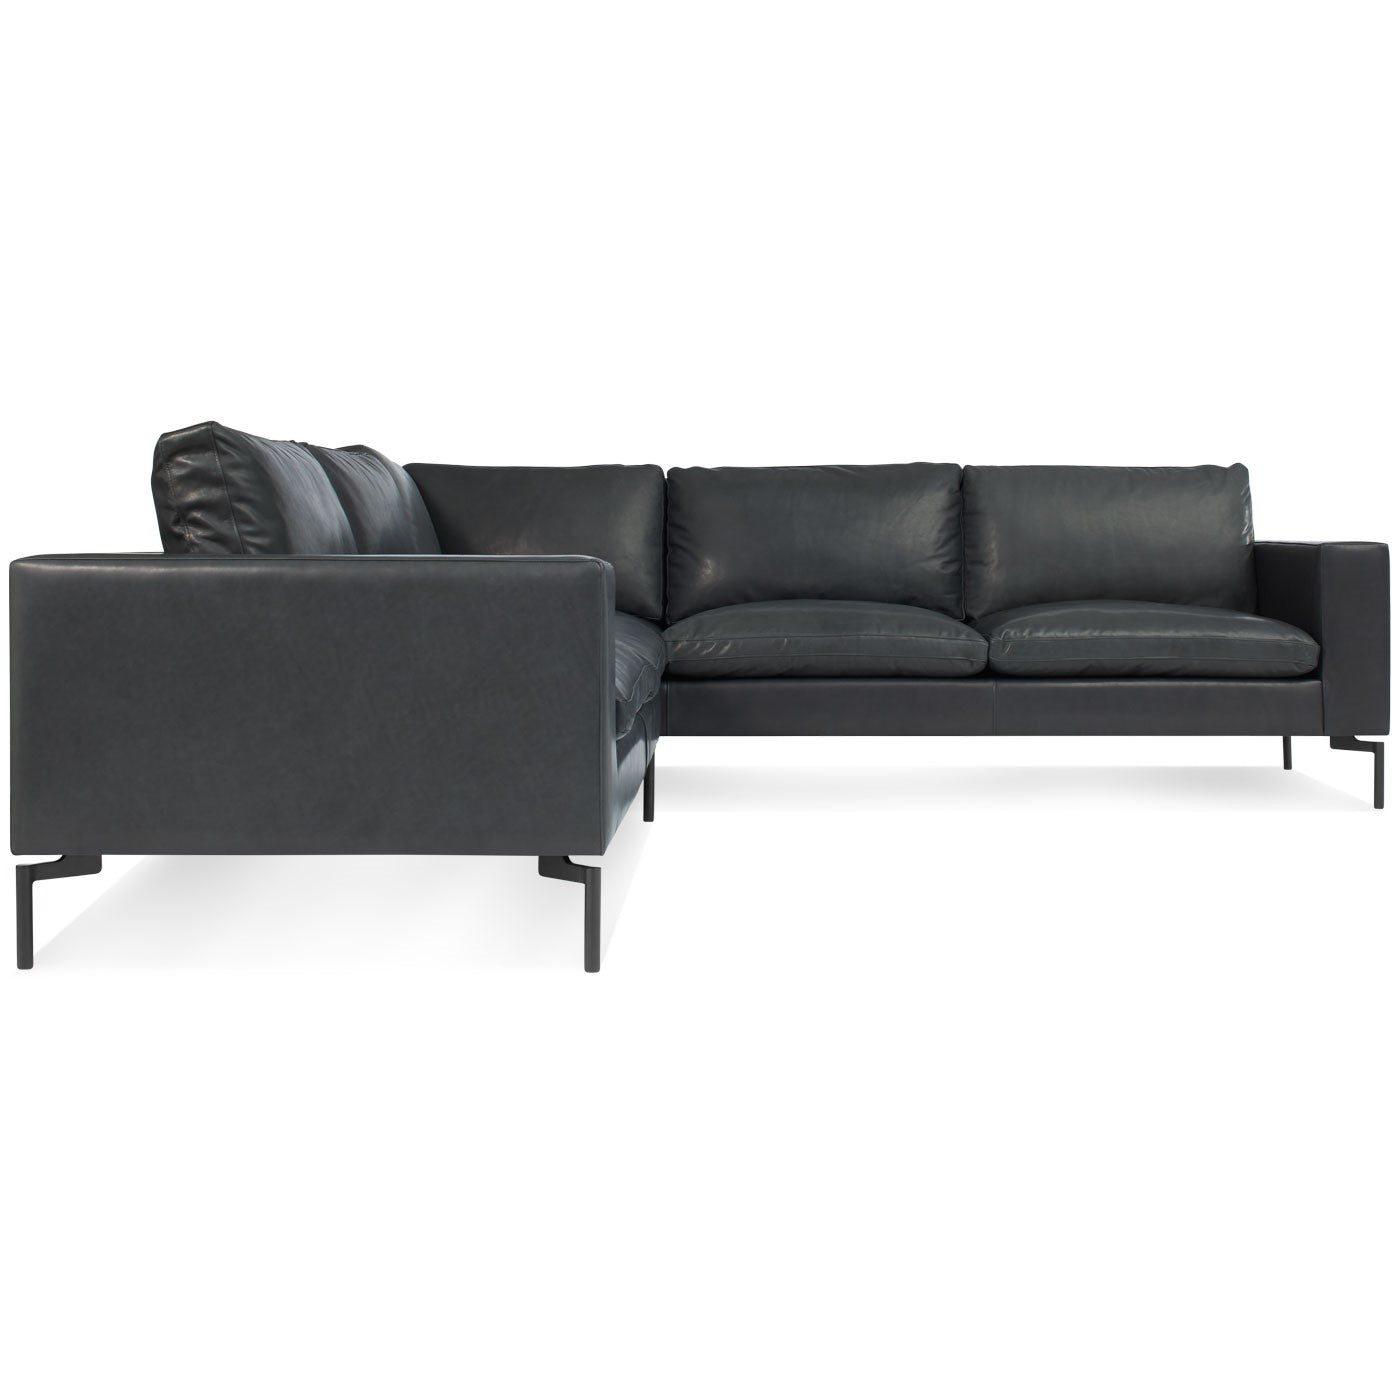 New Standard 102" Leather Sofa Sectional